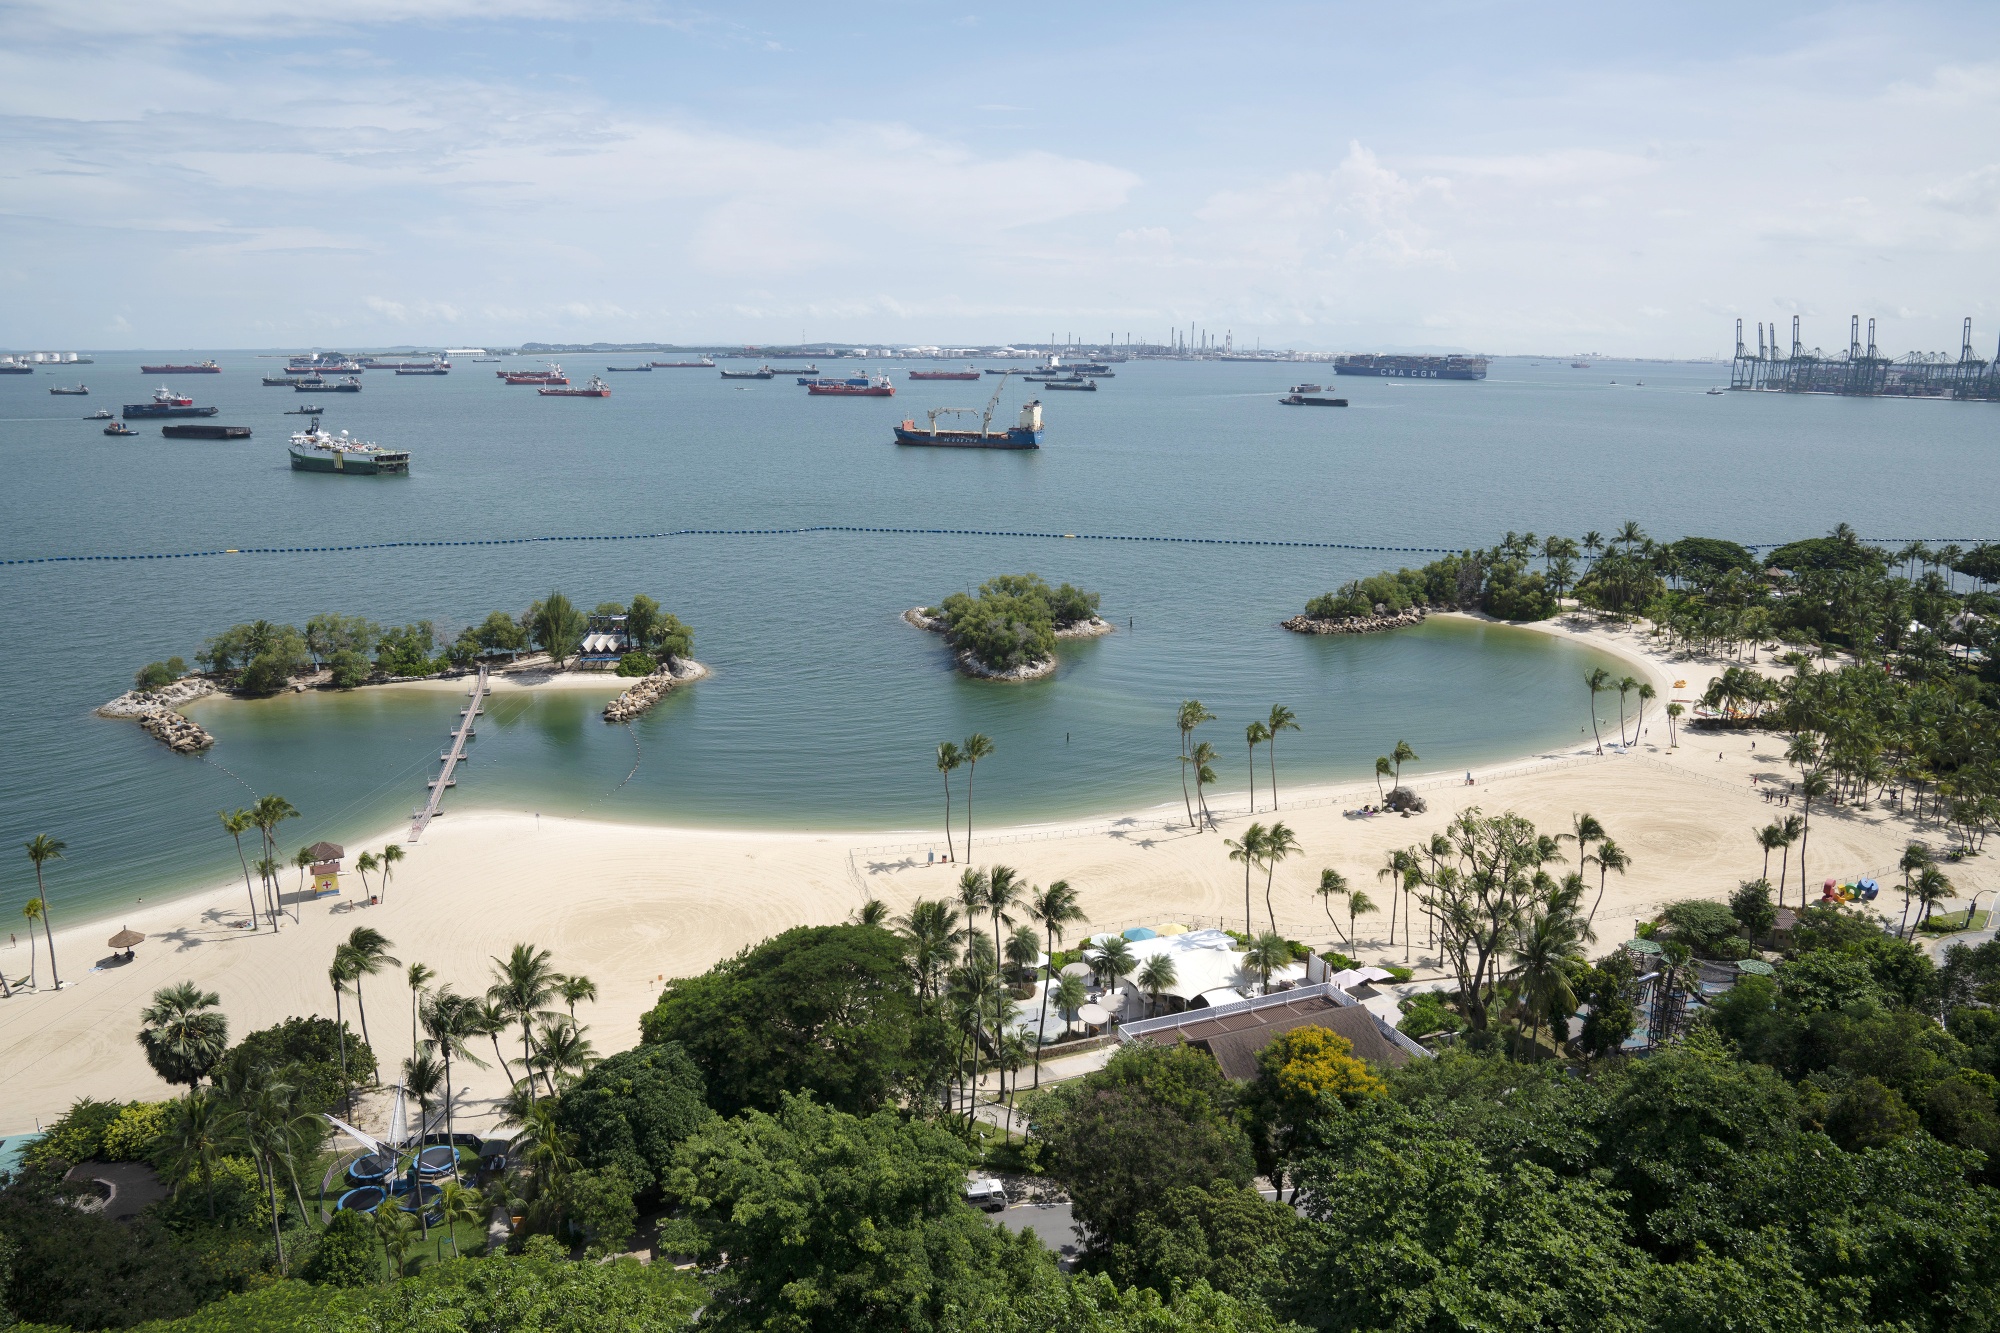 A quiet Siloso Beach in Singapore on July 6.